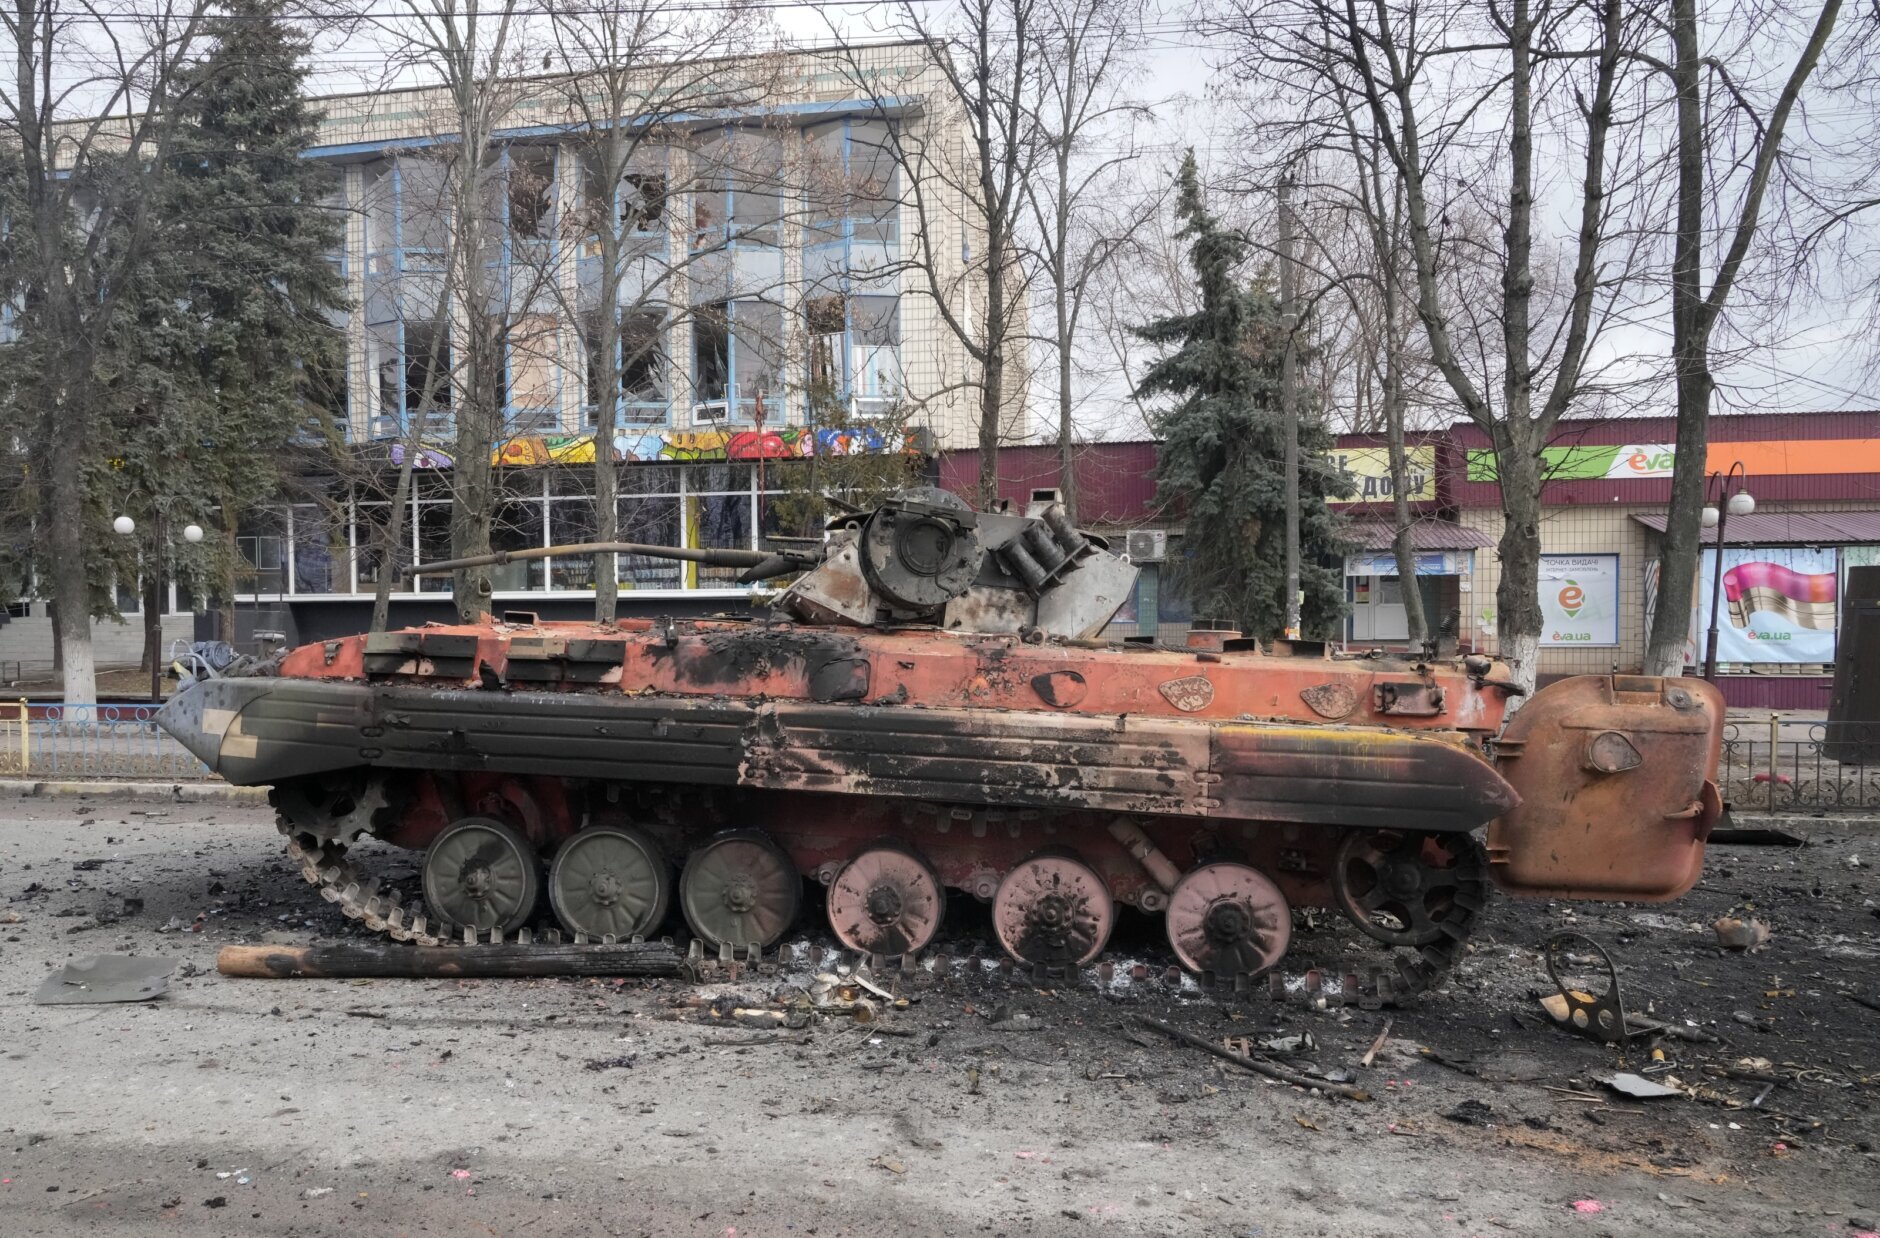 A destroyed armored personnel carrier stands in the central square of the town of Makariv, 60 kilometres west of Kyiv, Ukraine, after a heavy night battle Friday, March 4, 2022. (AP Photo/Efrem Lukatsky)